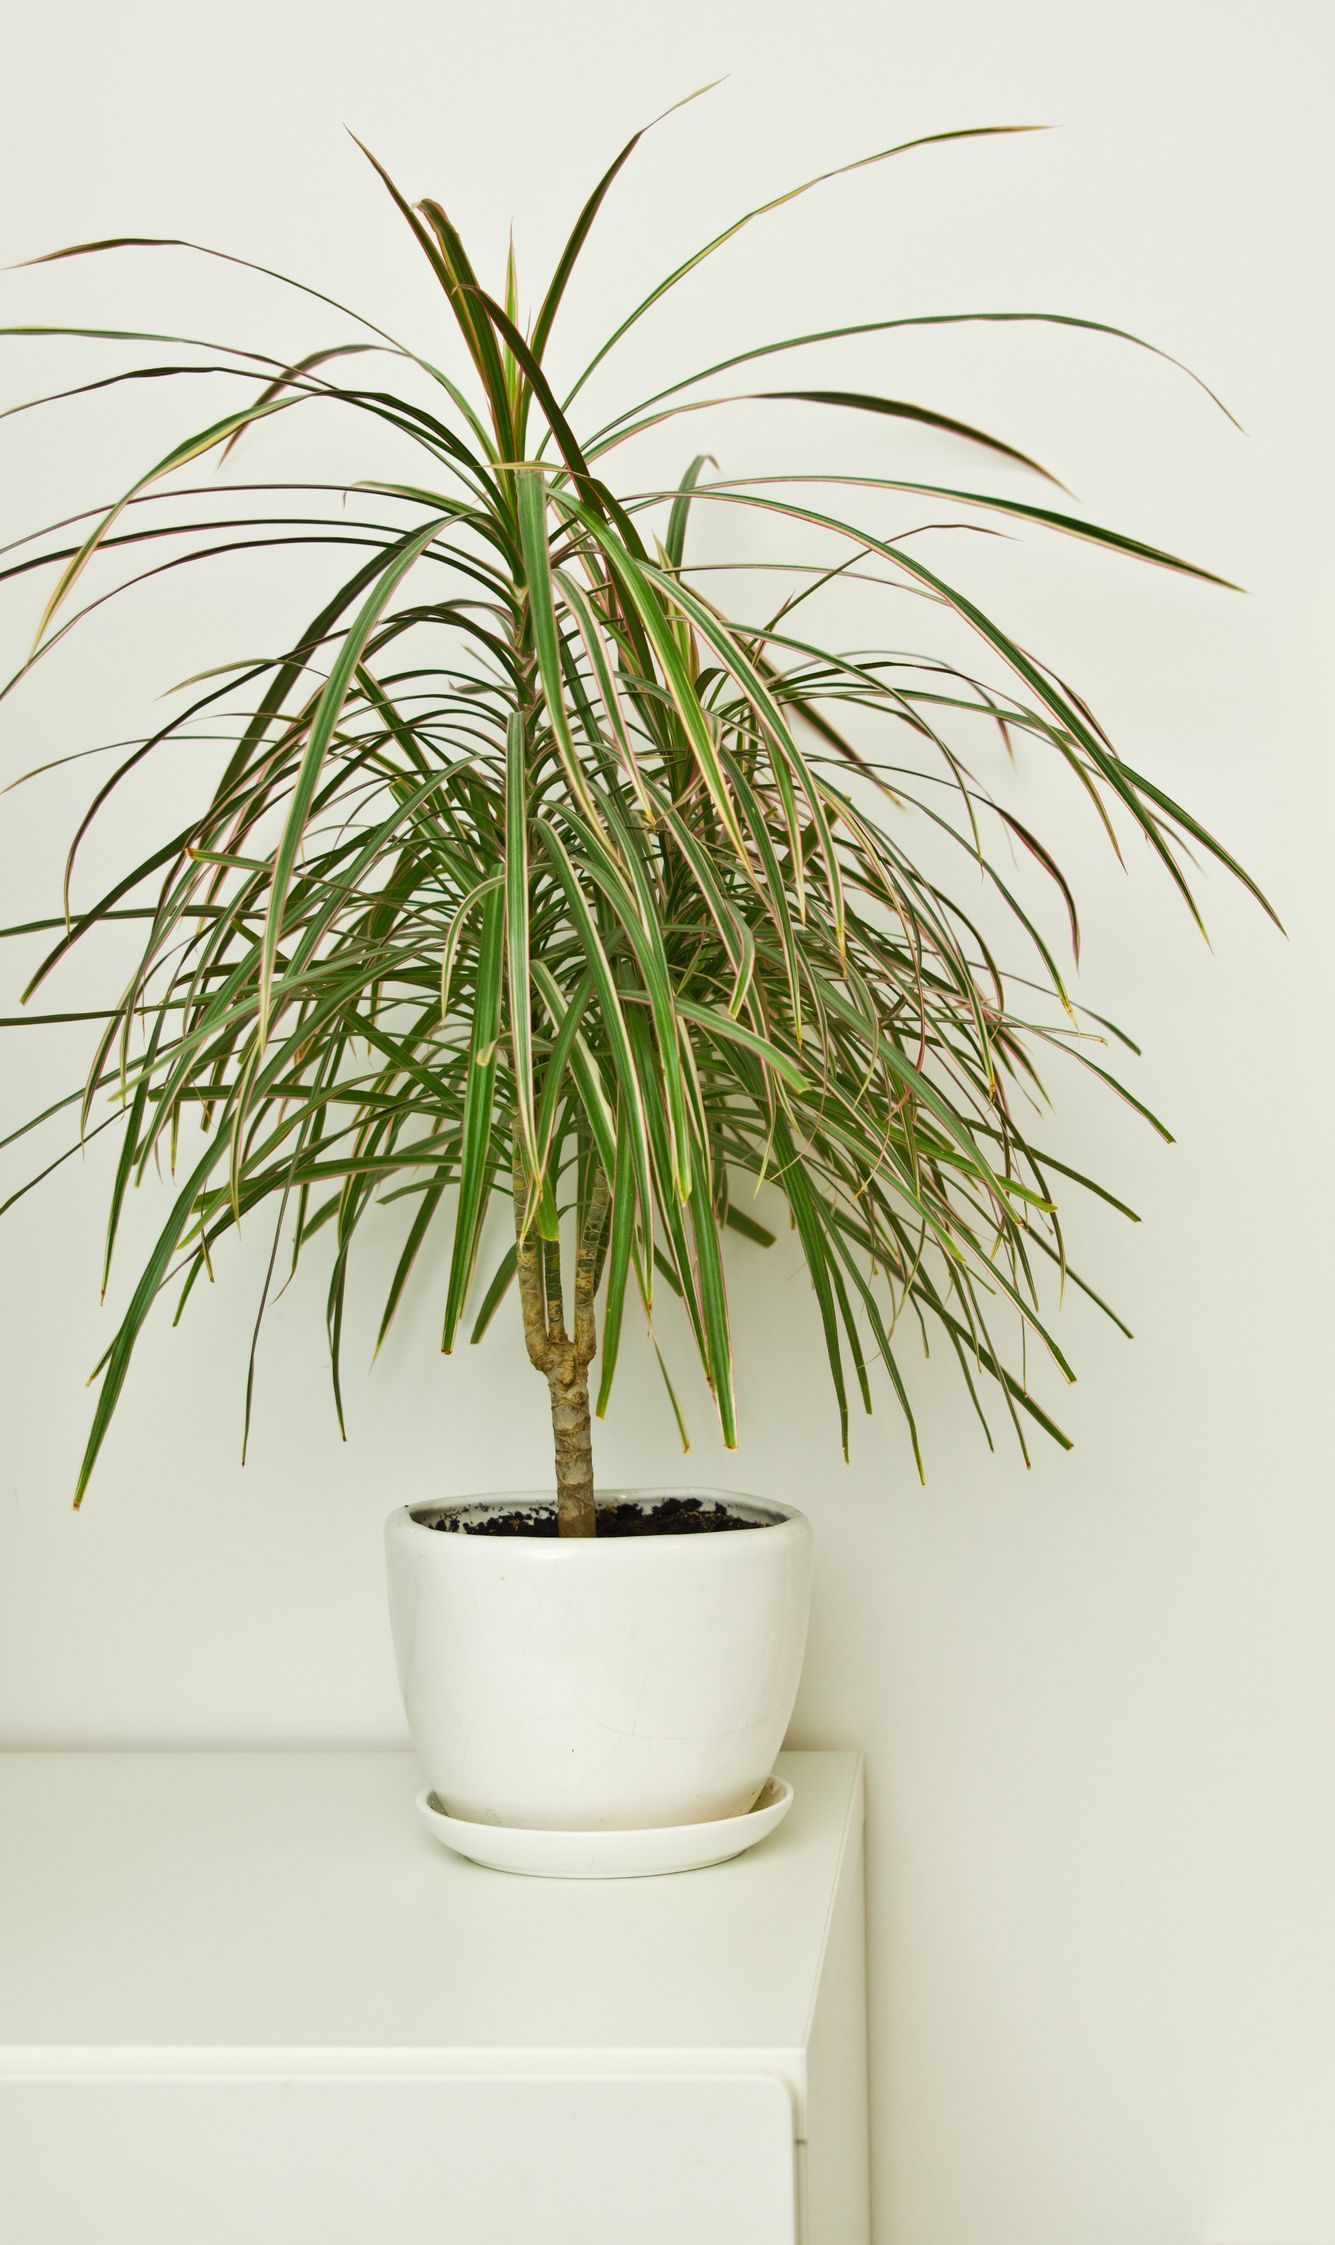 15 of the Best Bedroom Plants that Purify the Air - Easy Indoor ...